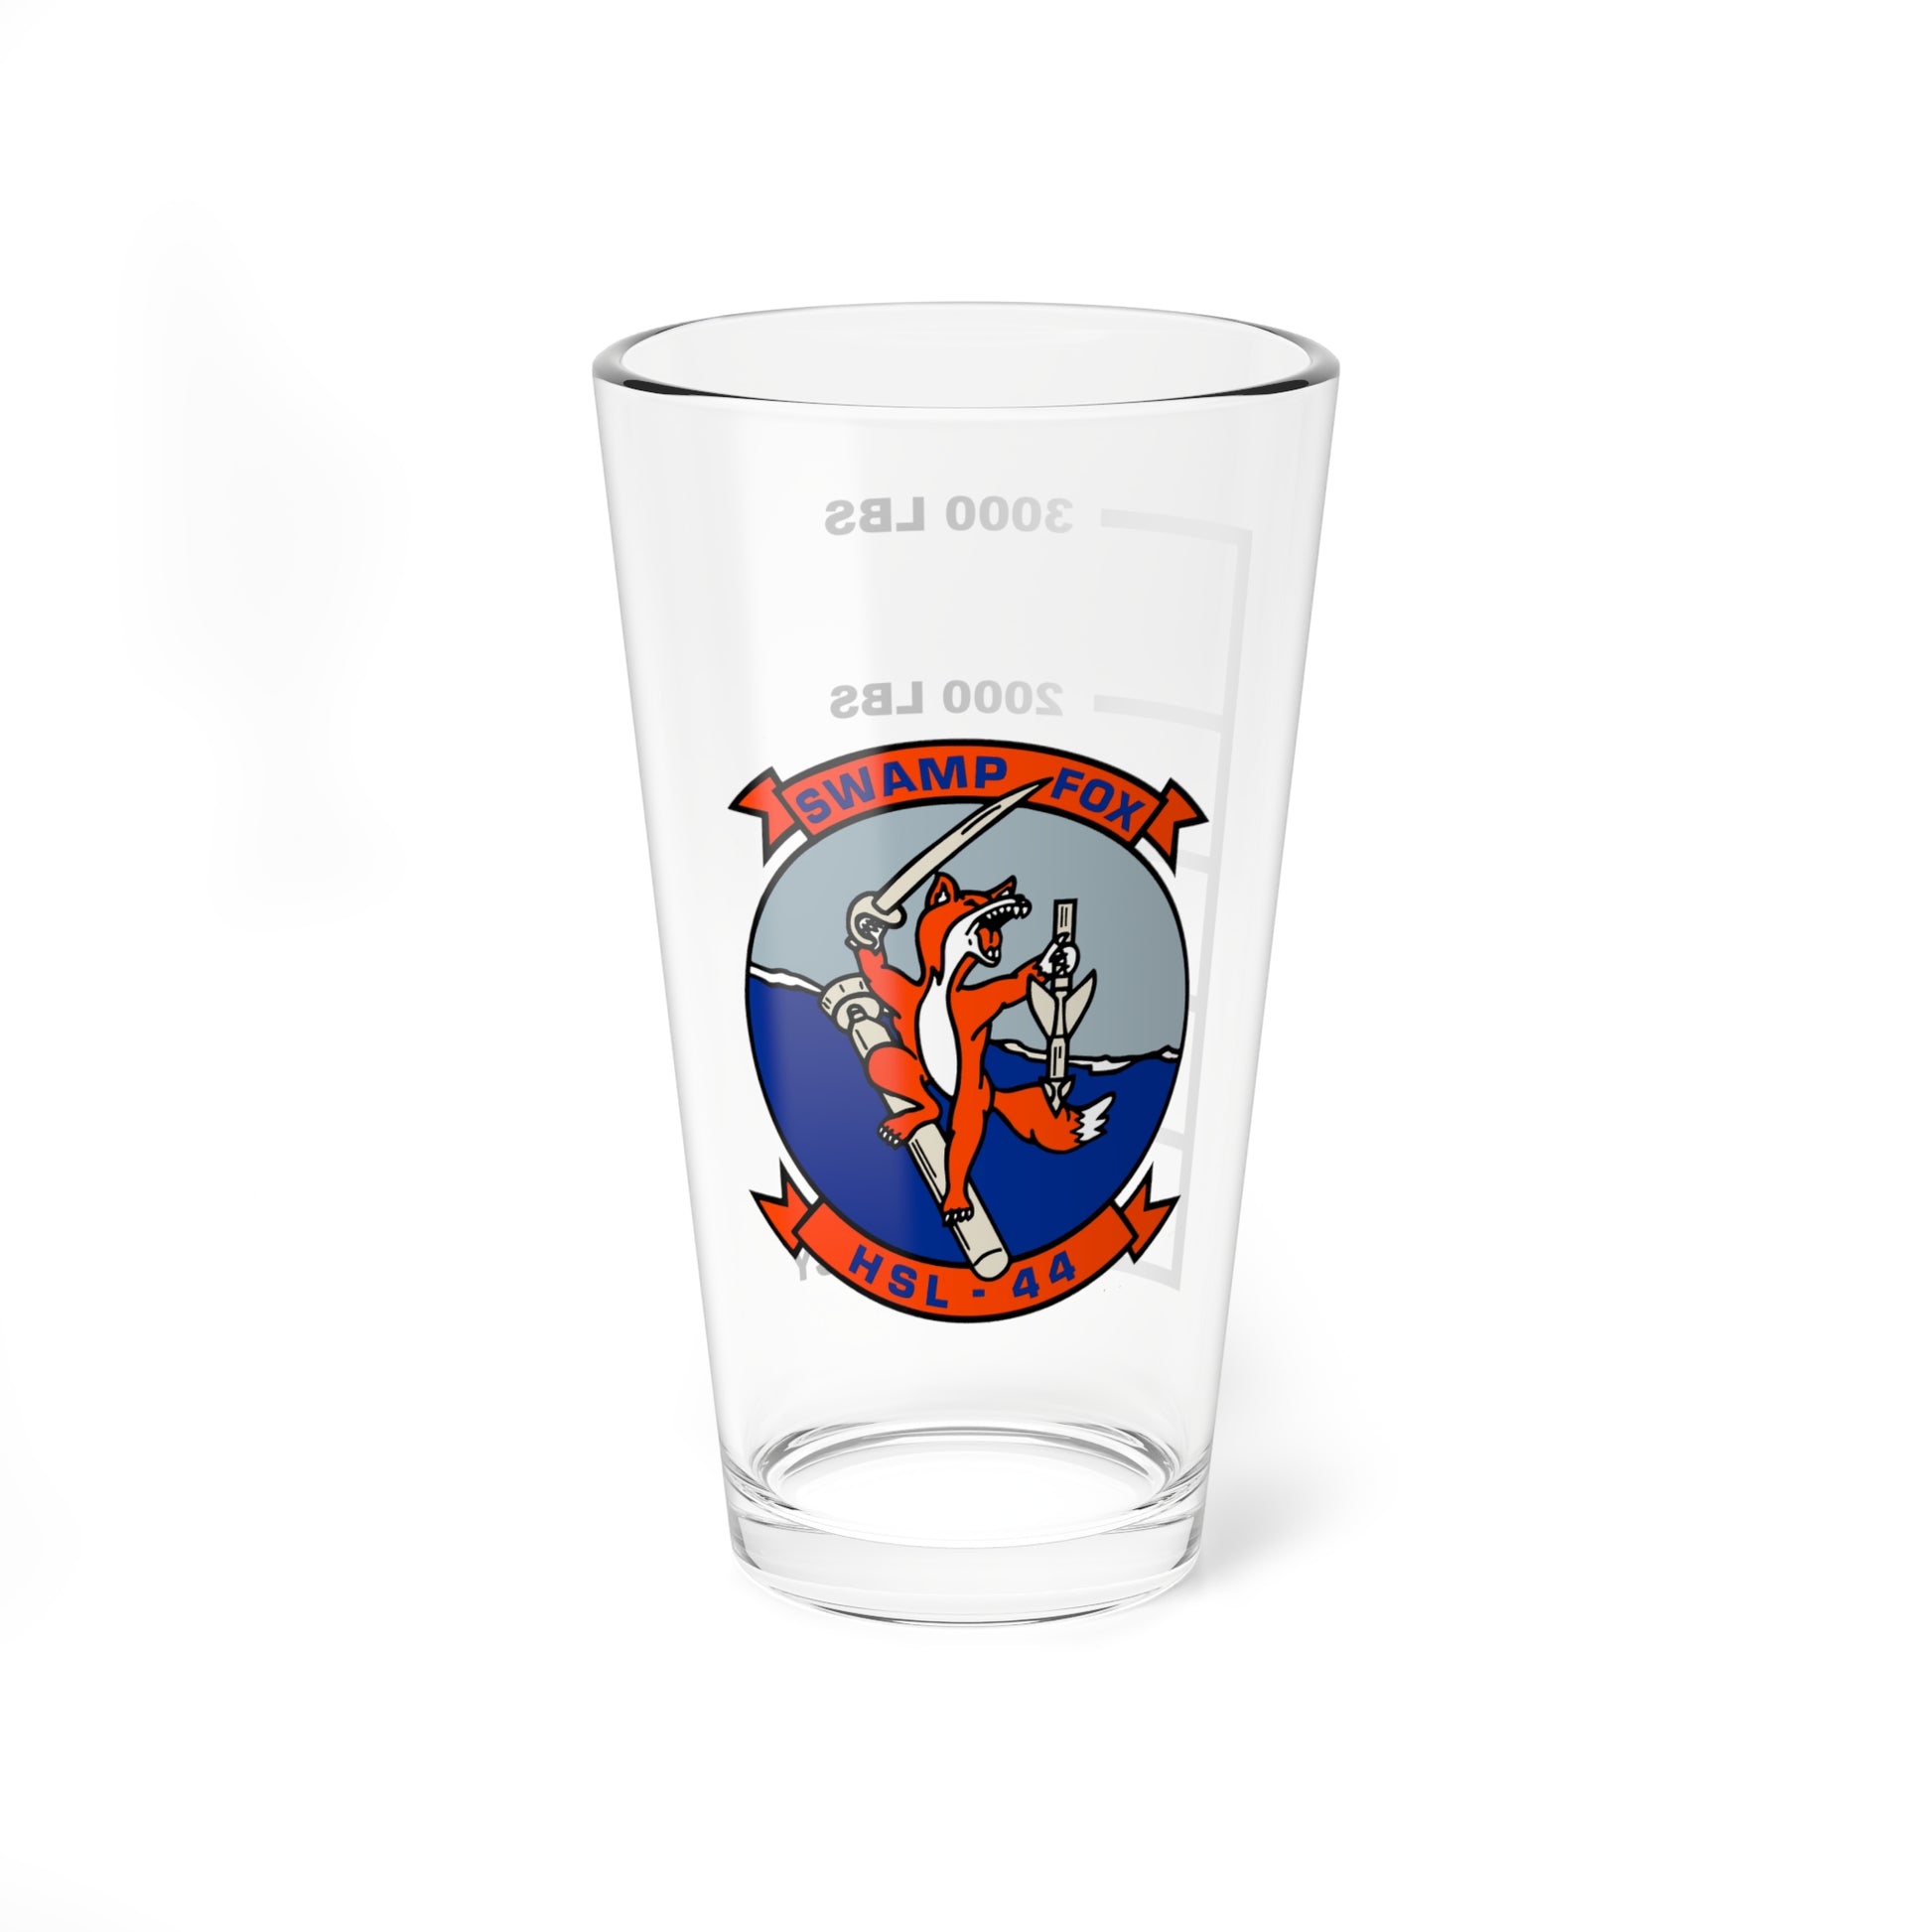 HSL-44 Swamp Foxes Fuel Low Pint Glass